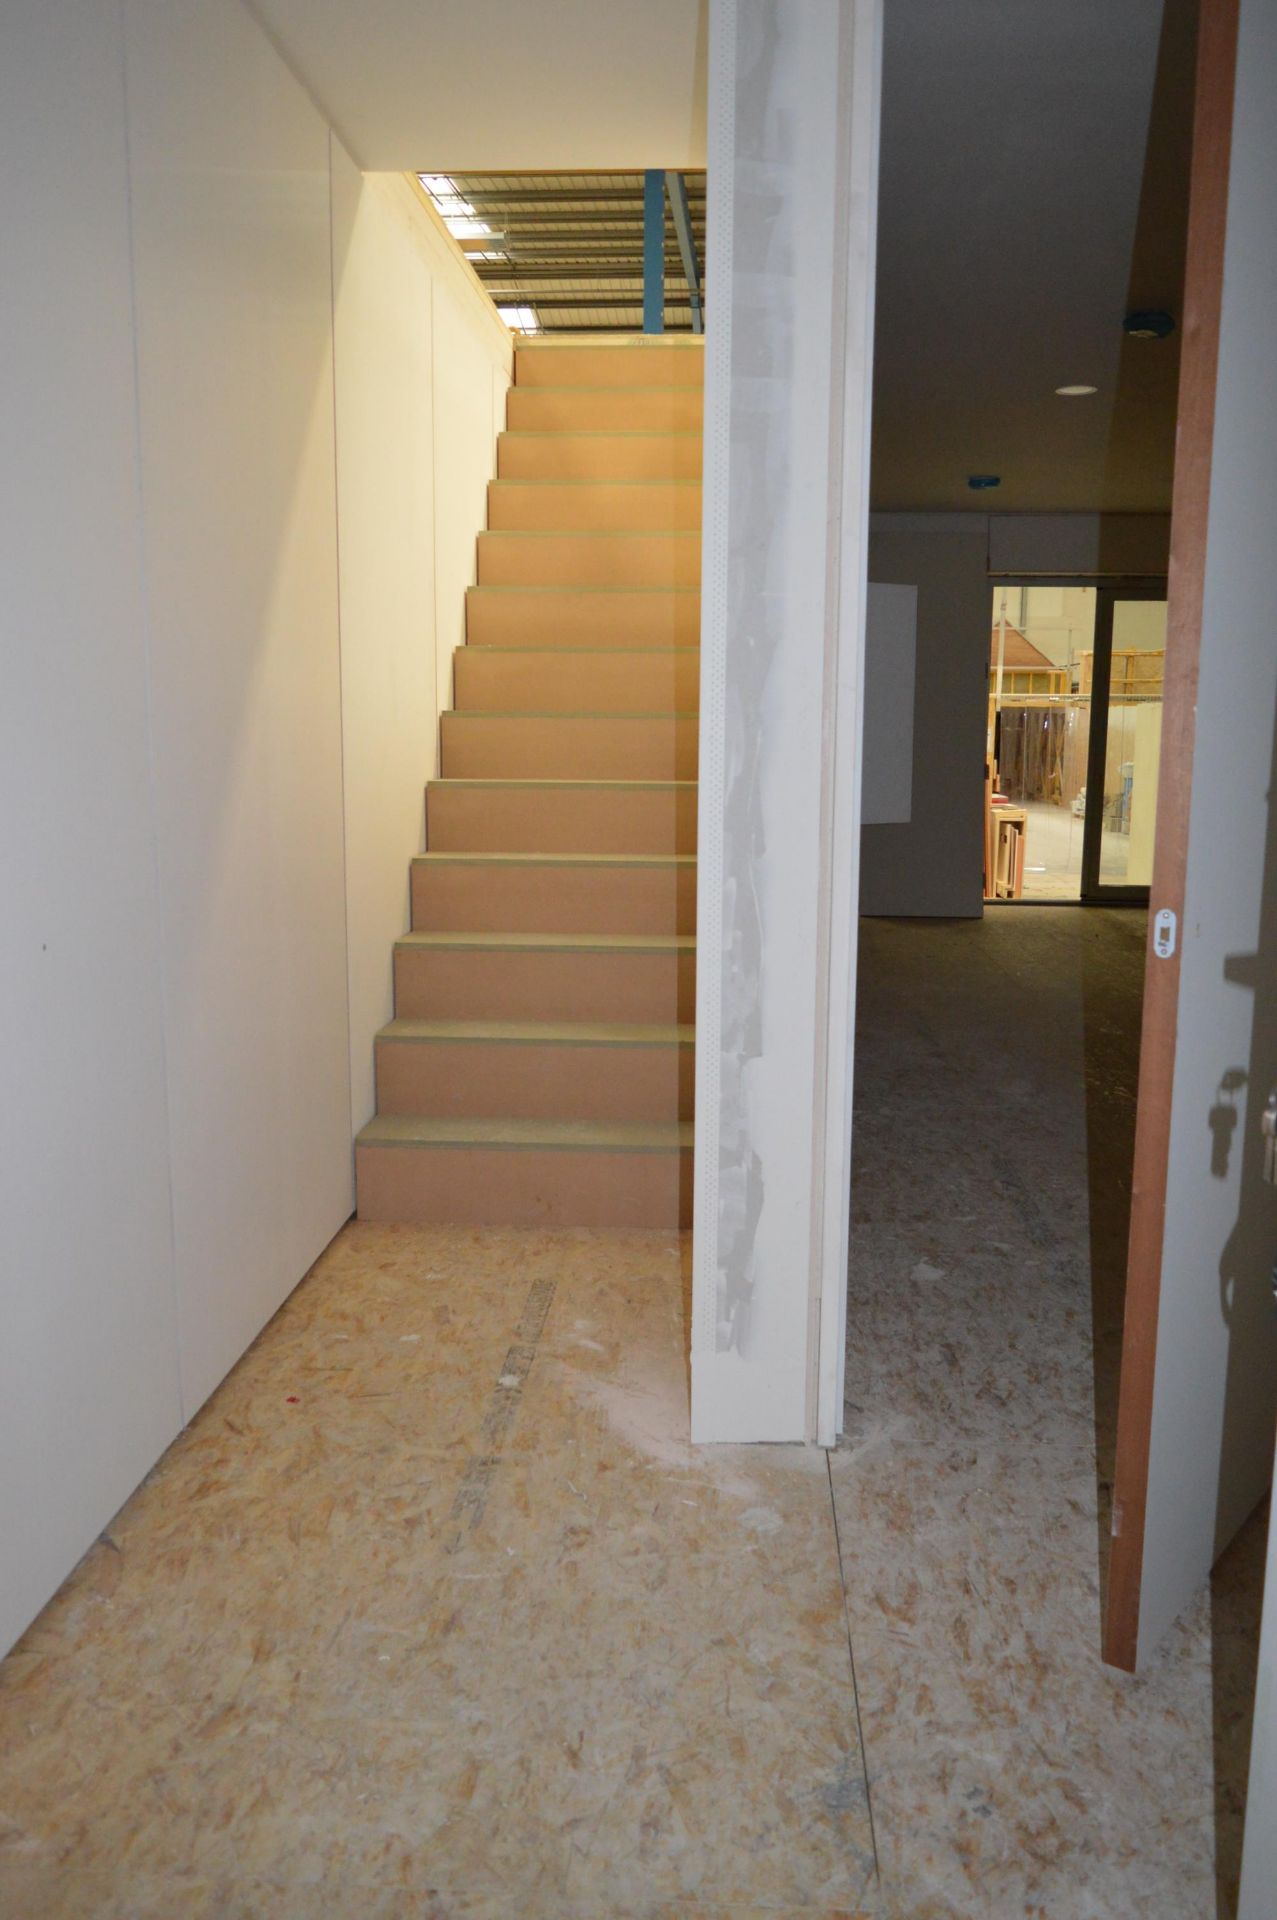 Housing pod with staircase, approx. 10.7m x 5.0m x 3.3m high - Image 3 of 6